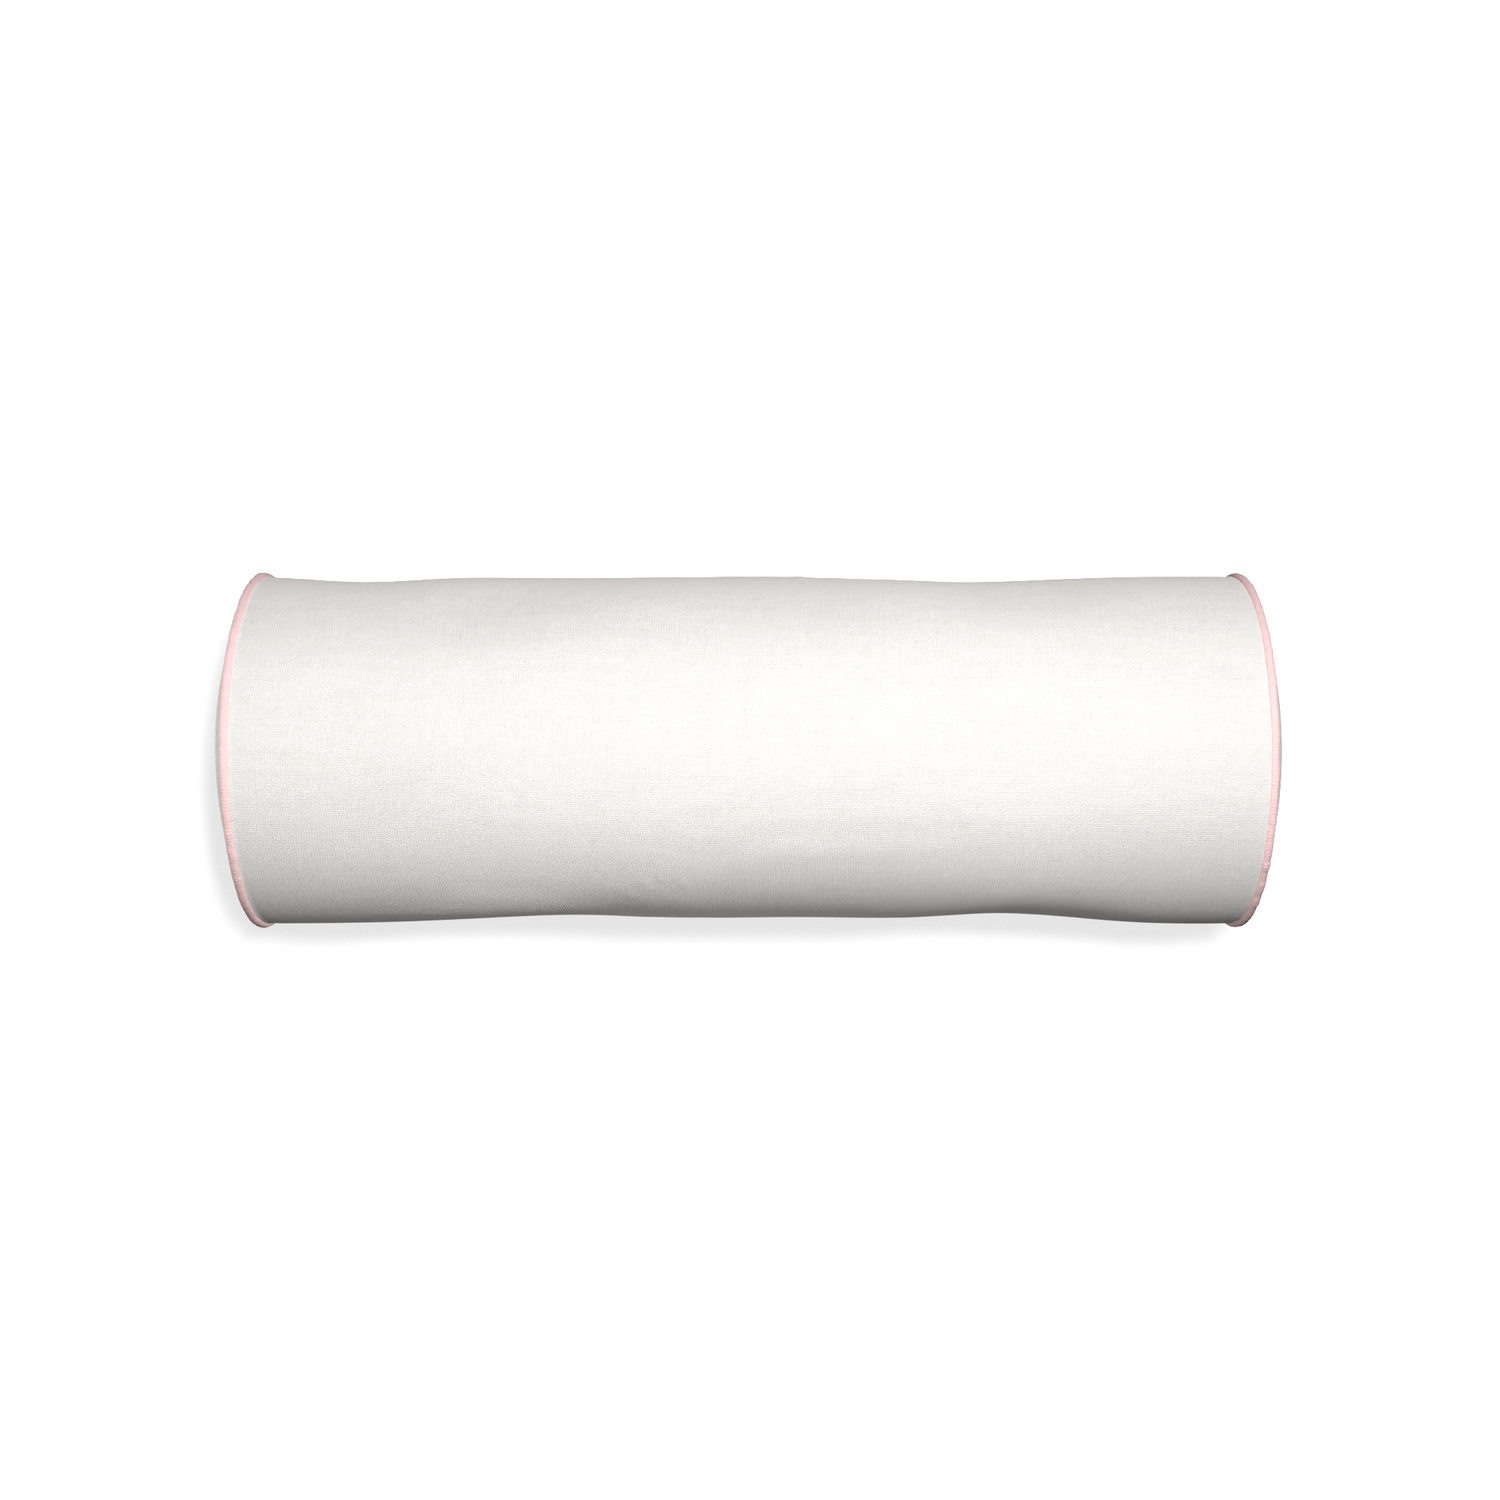 Bolster flour custom natural whitepillow with petal piping on white background